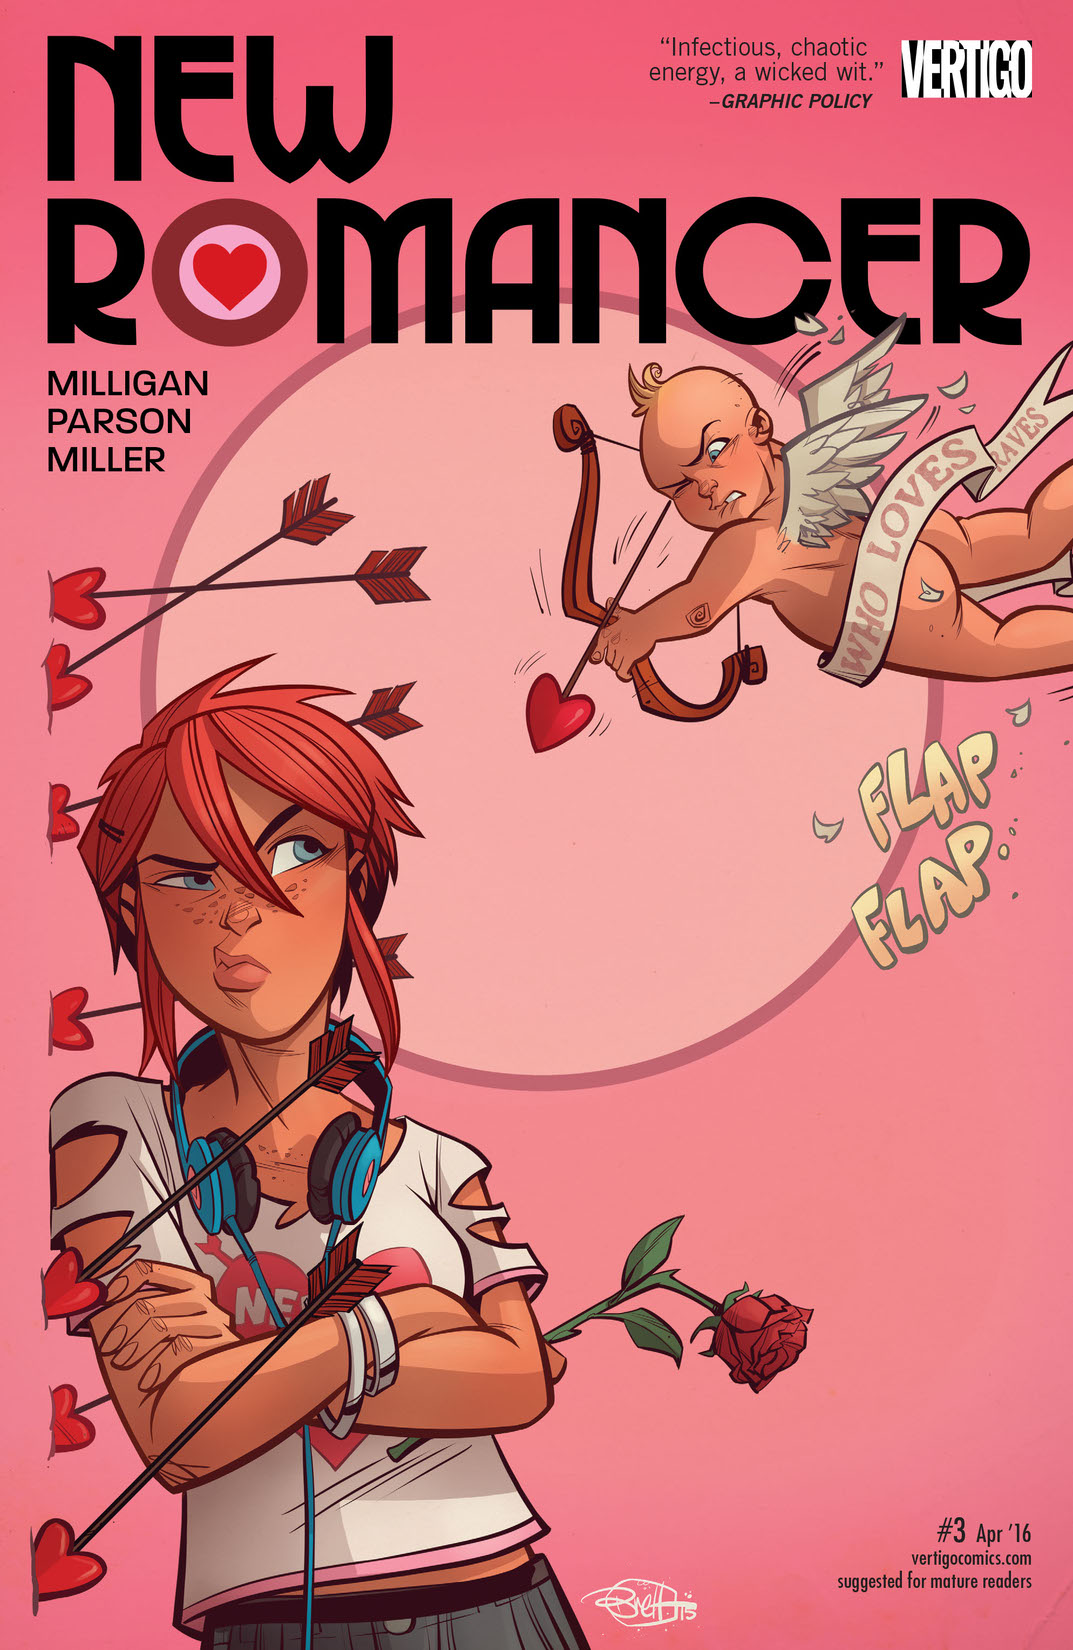 New Romancer #3 preview images